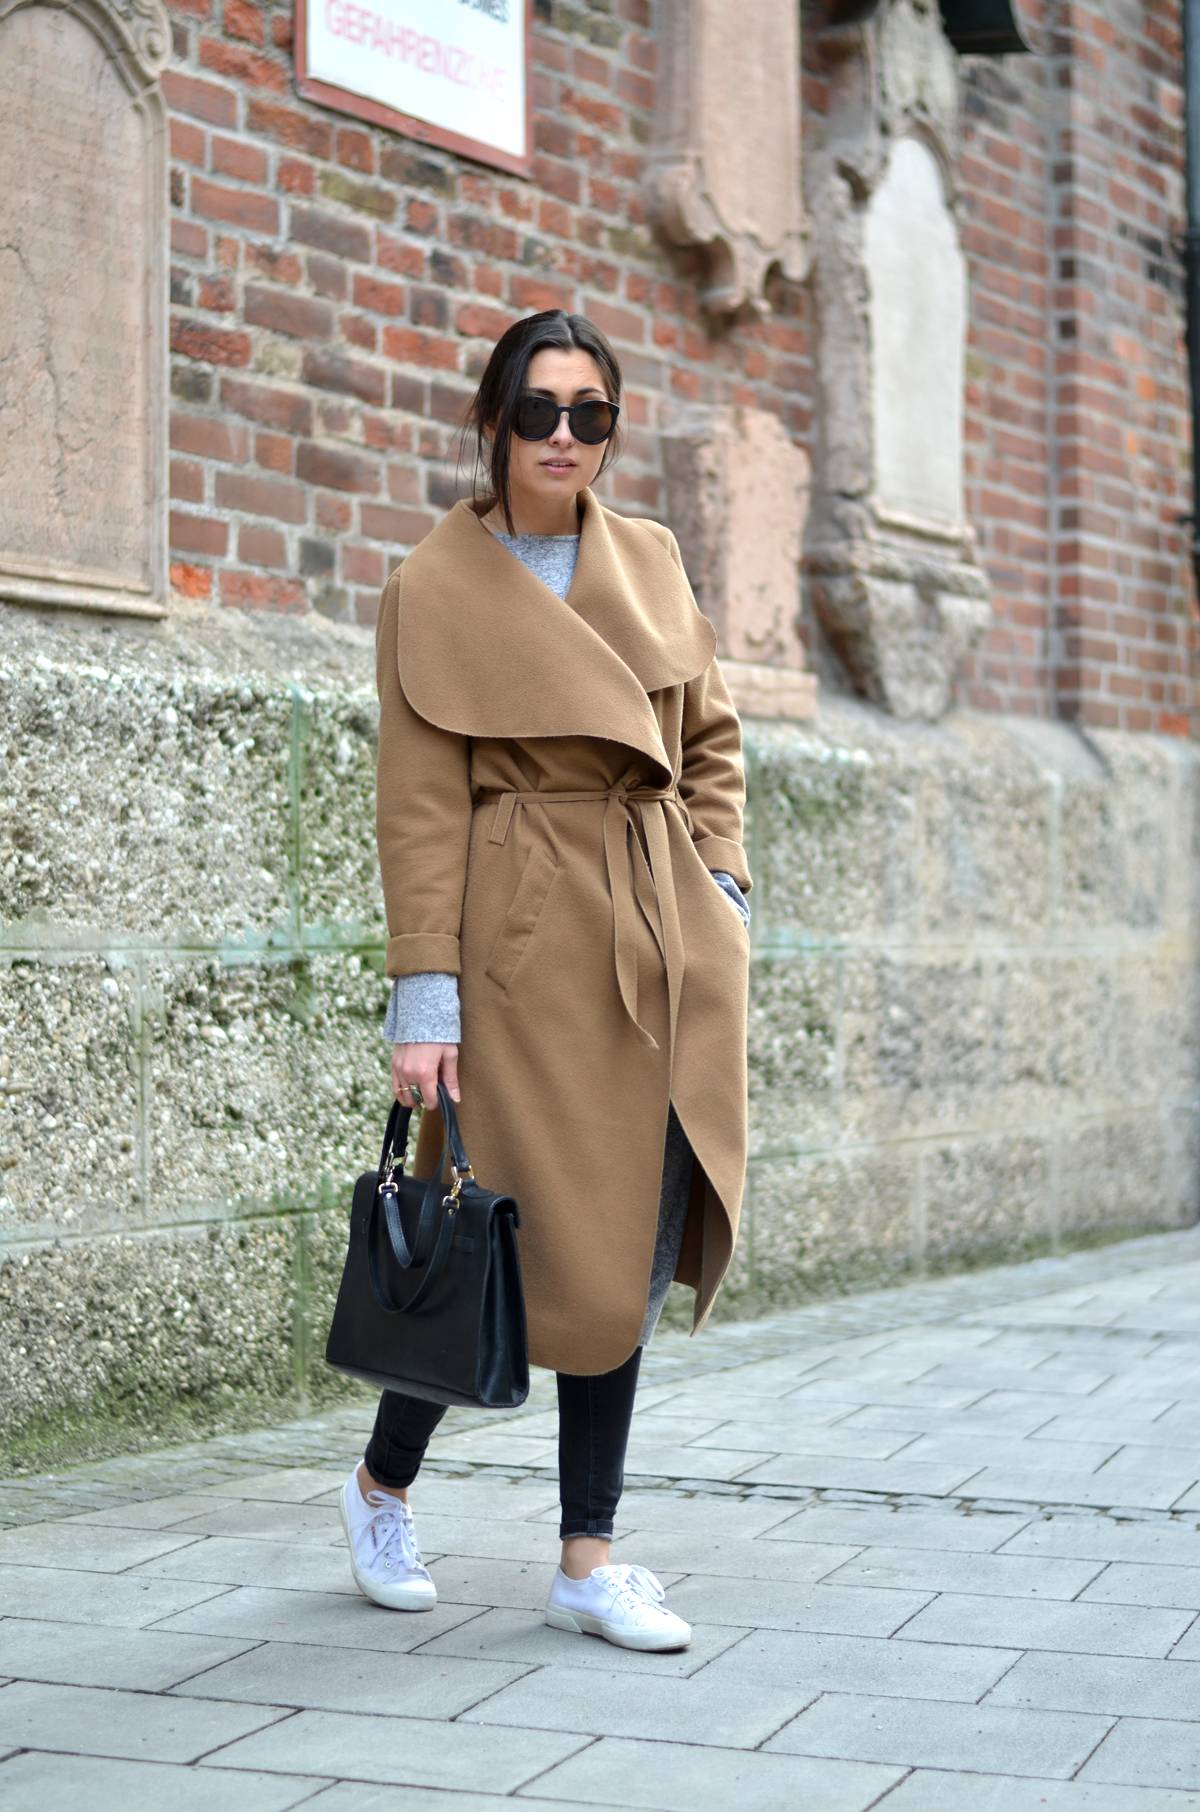 The Classic Camel Coat - Spring - Casual - Lookbook - Streetstyle - Munich - München - Fashionblog - Fashionblogger - Fashionista - Ripped Jeans - Calvin Klein Sunnies - Vintage Hermés - Supergas - Layering